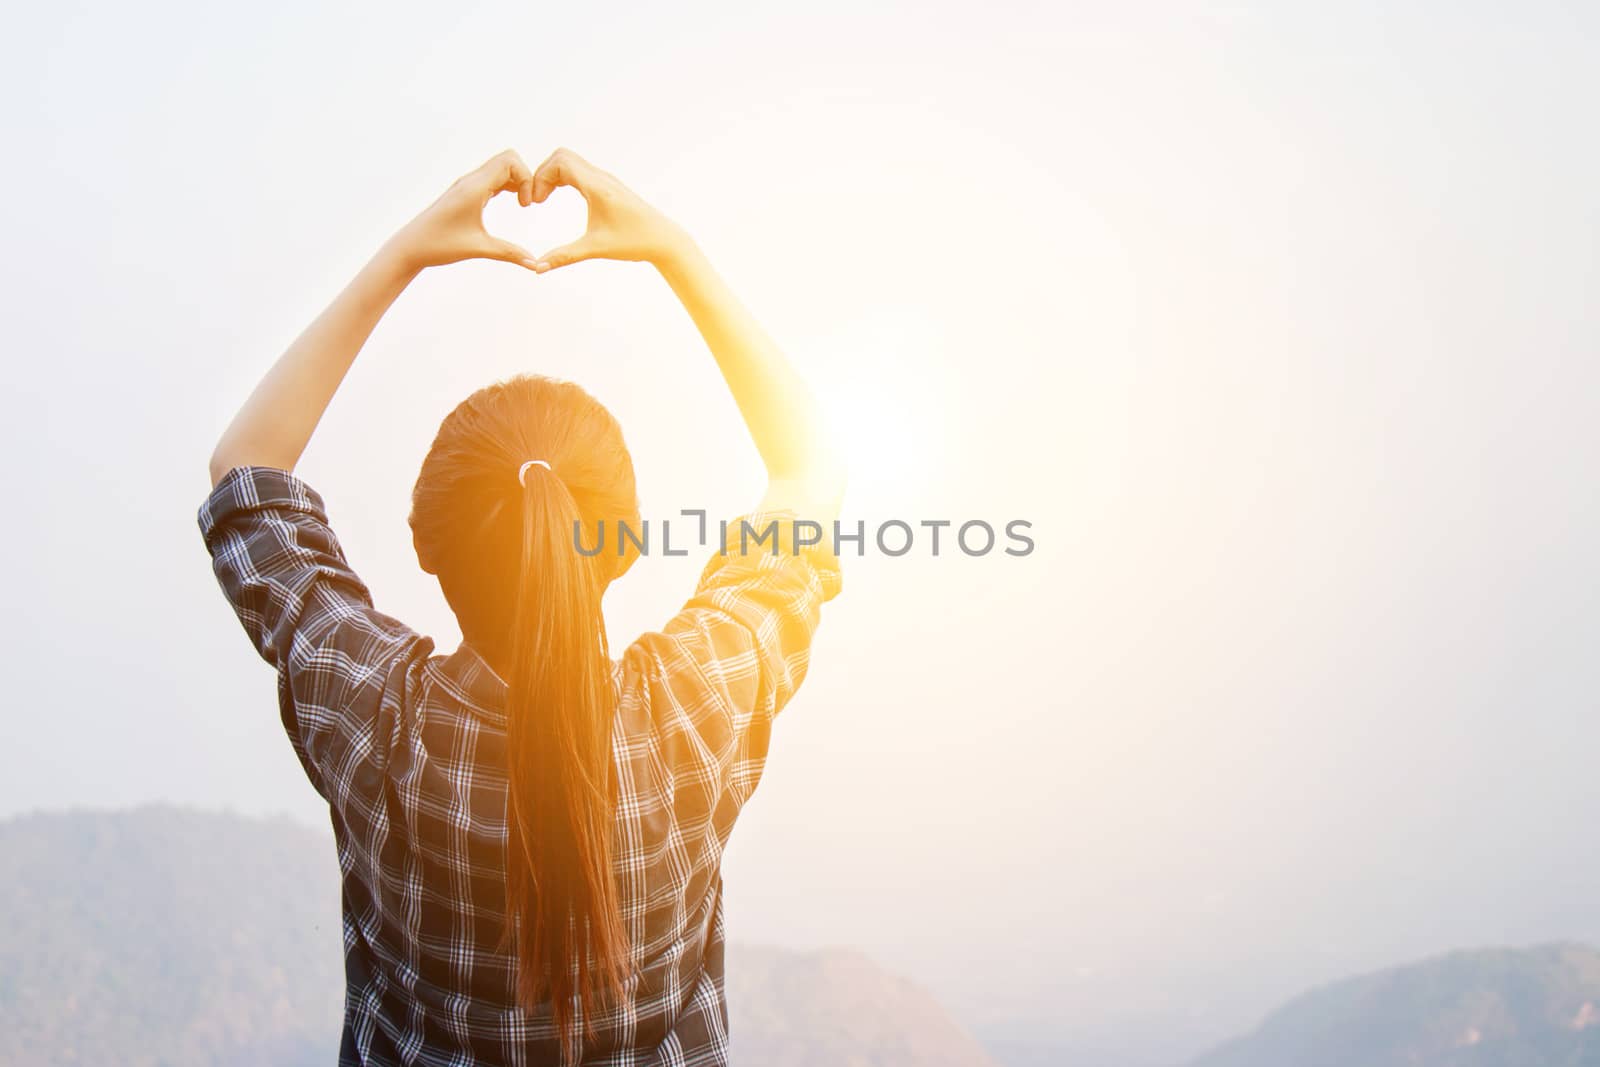 I love travel concept : Freedom traveler woman standing with heart shaped hands and enjoy a wonderful nature at sunrise with morning light effect